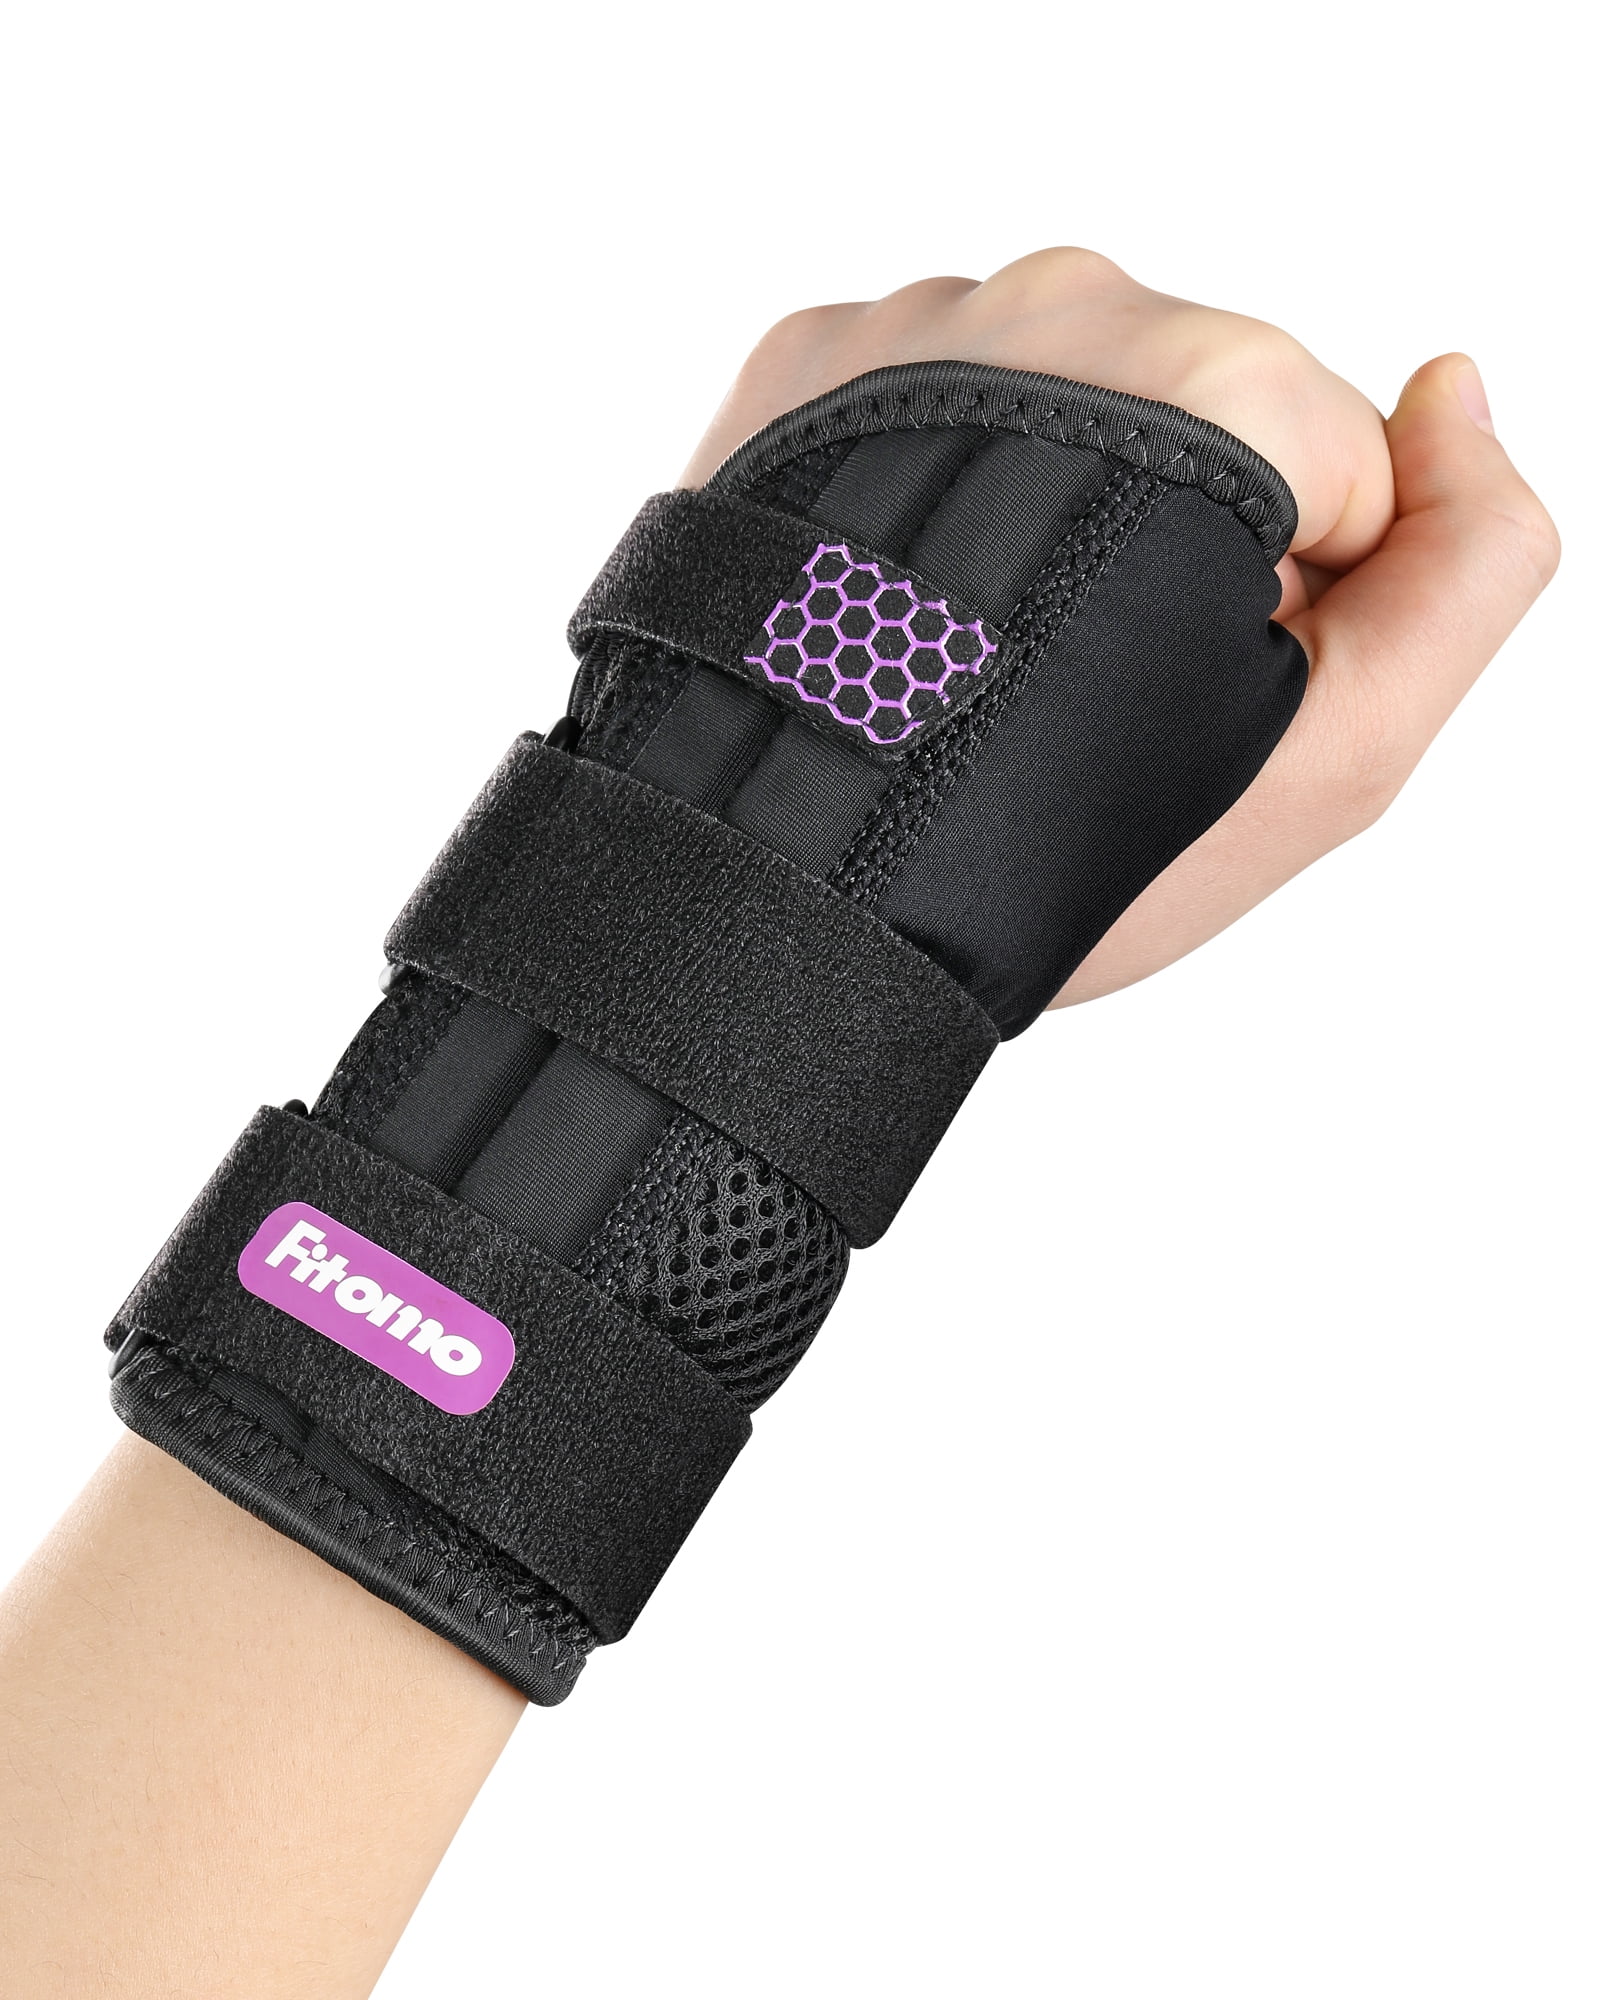 Wrist Brace for Carpal Tunnel, Adjustable Wrist Support Brace with Splints  Right Hand, Small/Medium, Arm Compression Hand Support for Injuries, Wrist  Pain, Sprain, Sports 